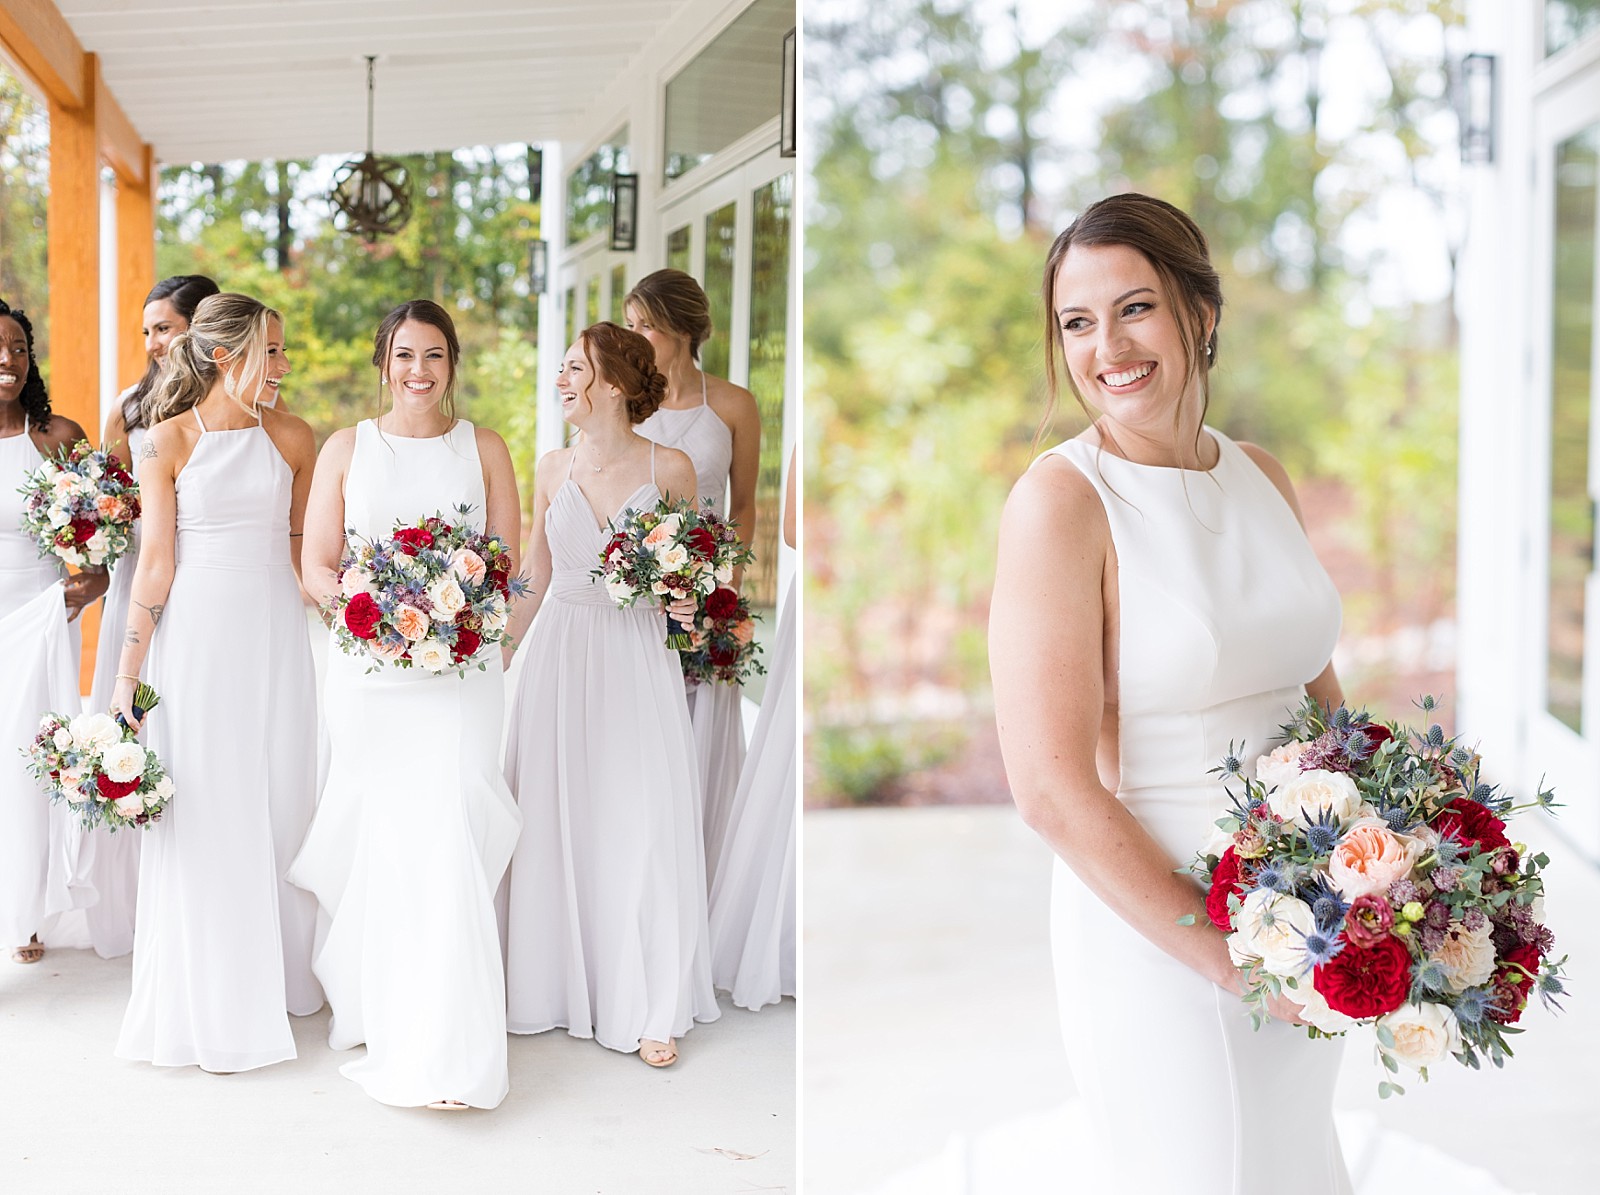 Wedding party at The Upchurch | Raleigh Wedding Photographer